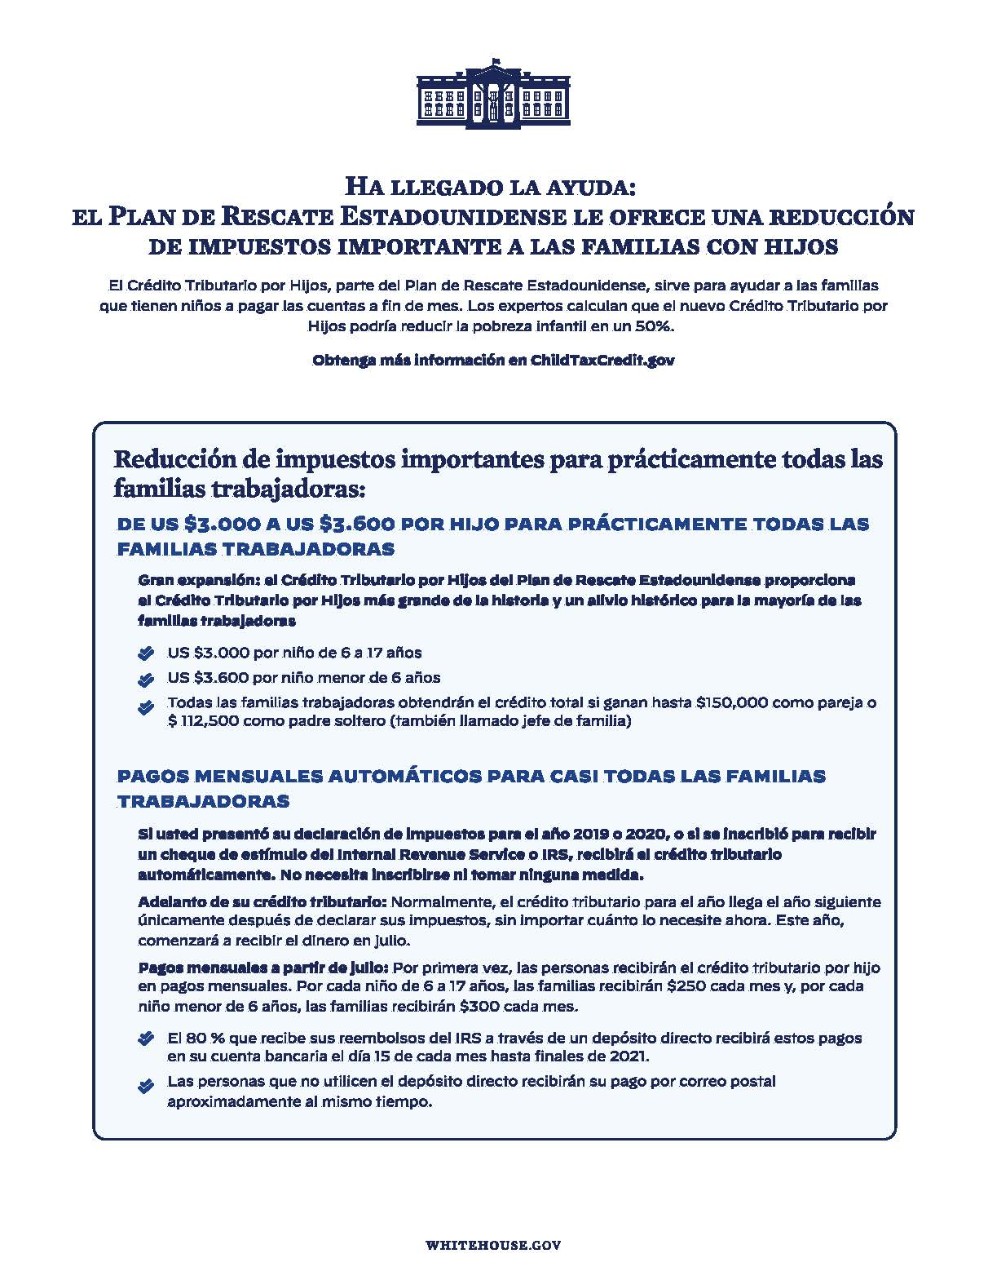 Child Tax Credit One Pager Spanish_Page_1